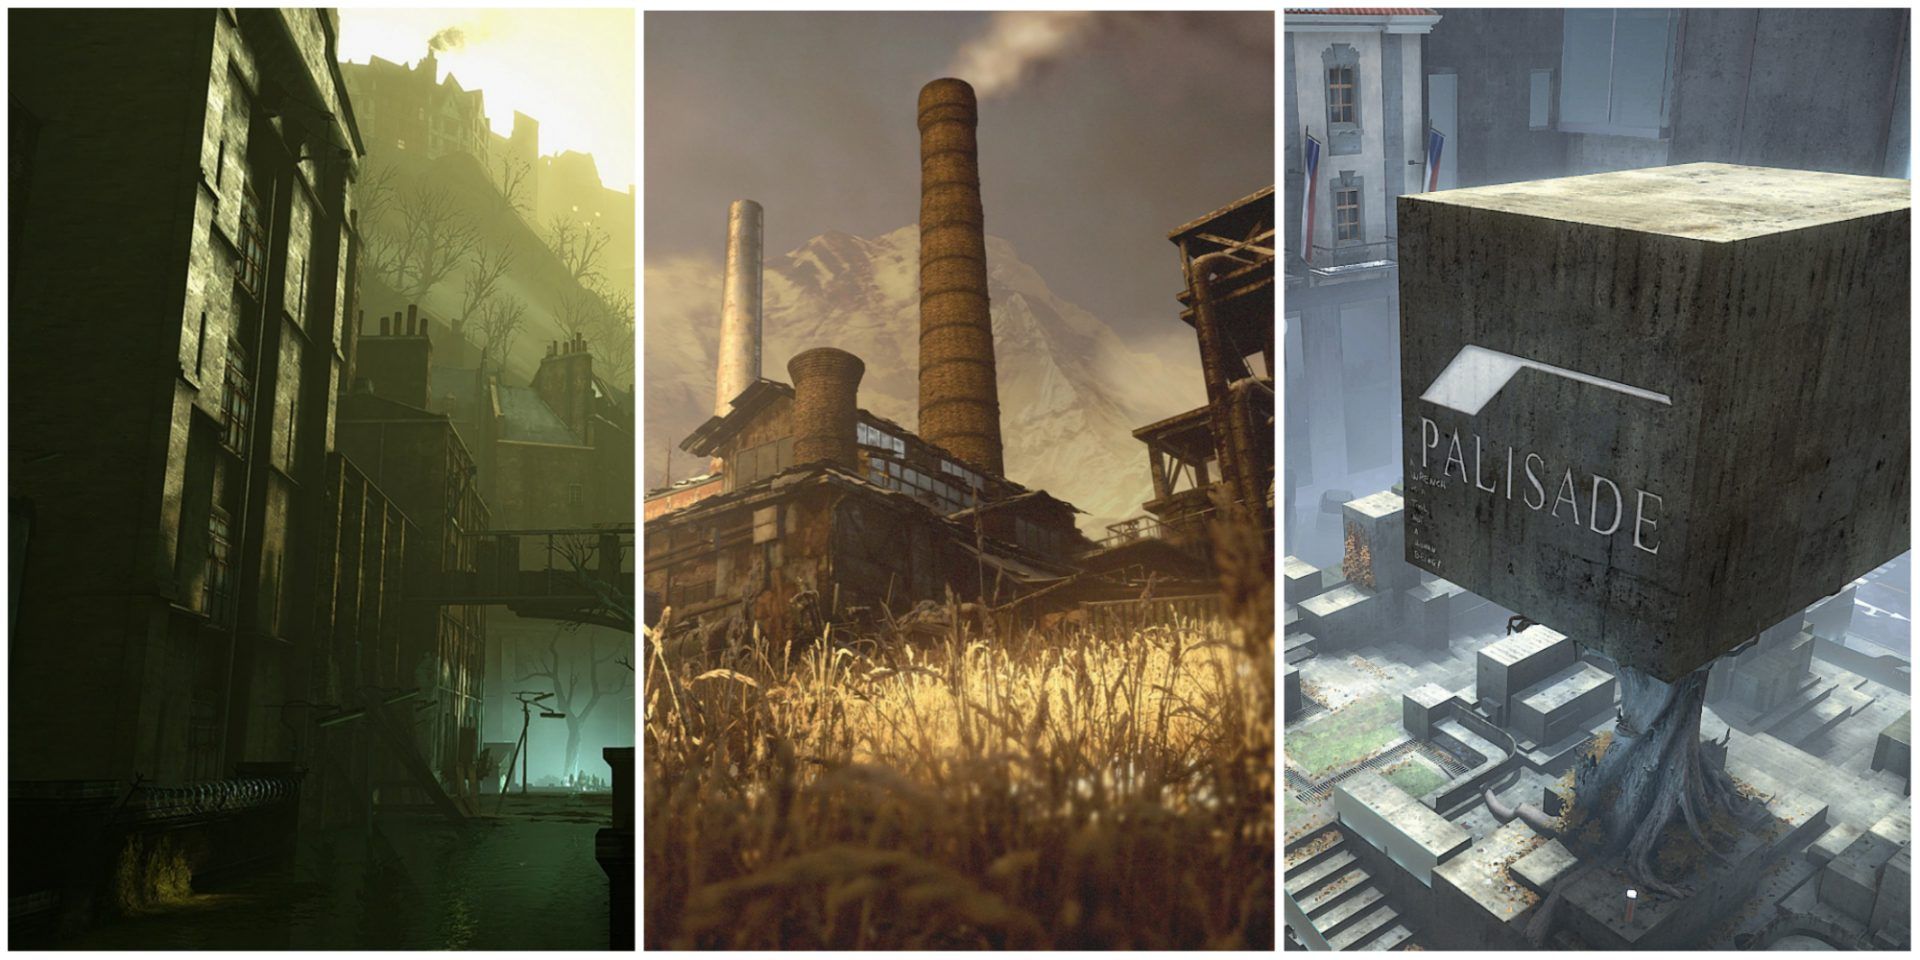 Dishonored Flooded City, Resident Evil Village Factory, and Deus Ex Mankind Divided